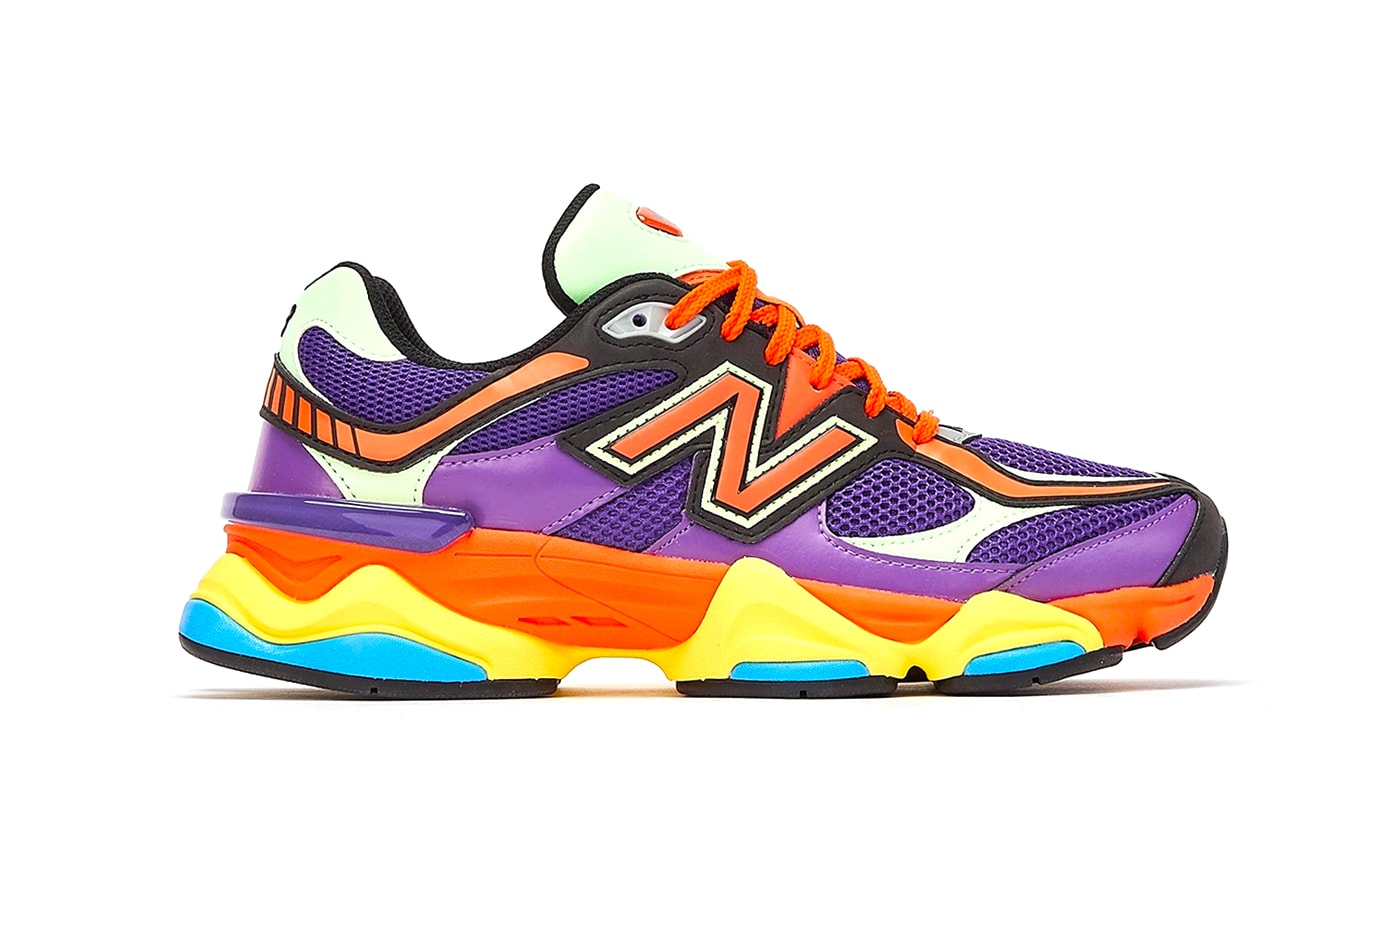 New Balance 9060 Arrives in "Prism Purple" This July U9060NBX july 1st release info summer sneakers shoes multi colored packaging vibrant sneakers colorful